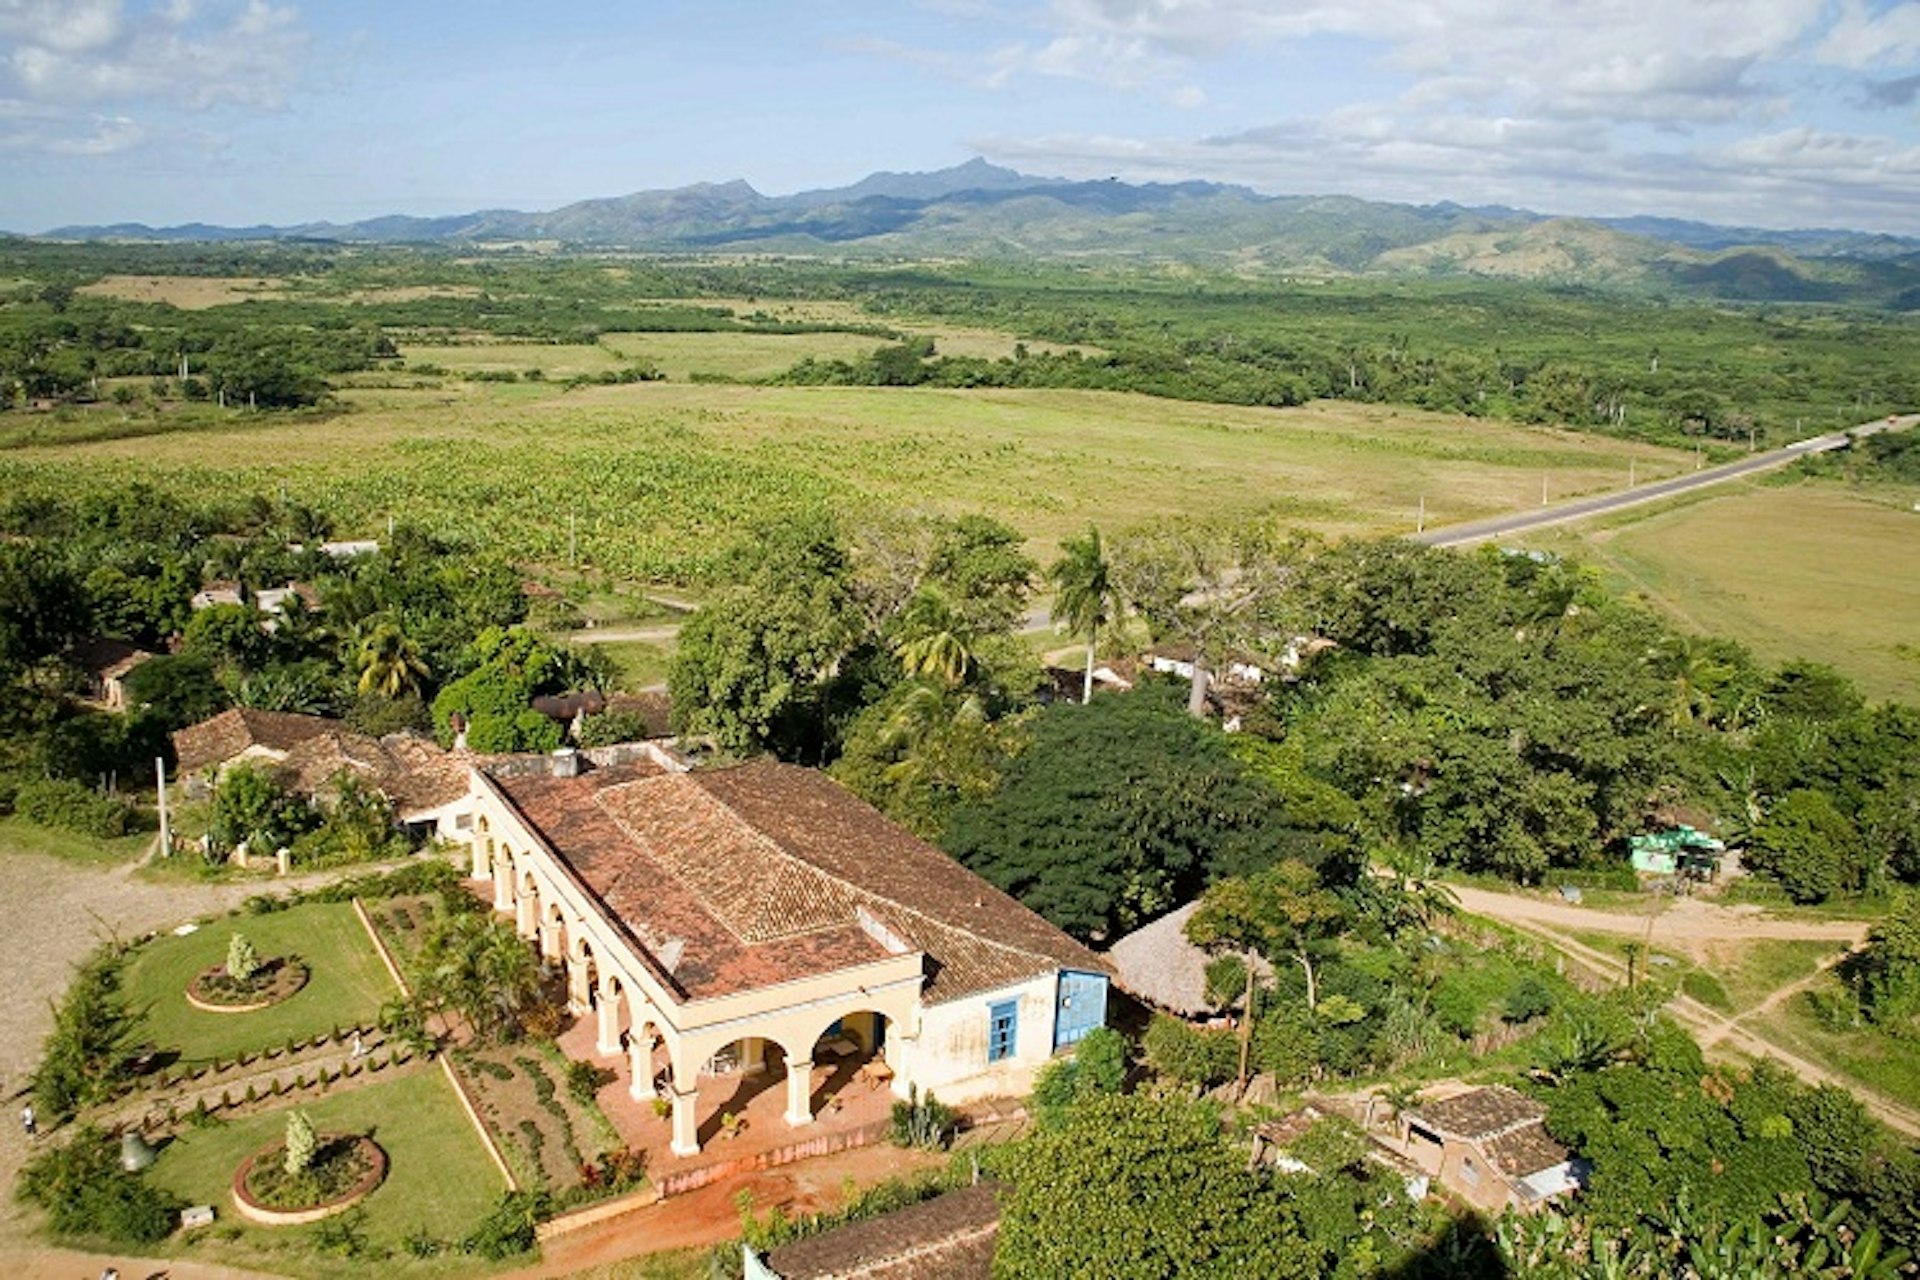 Manaca Iznaga estate in the Valley of the Sugar Mills. Claire Boobbyer / Lonely Planet